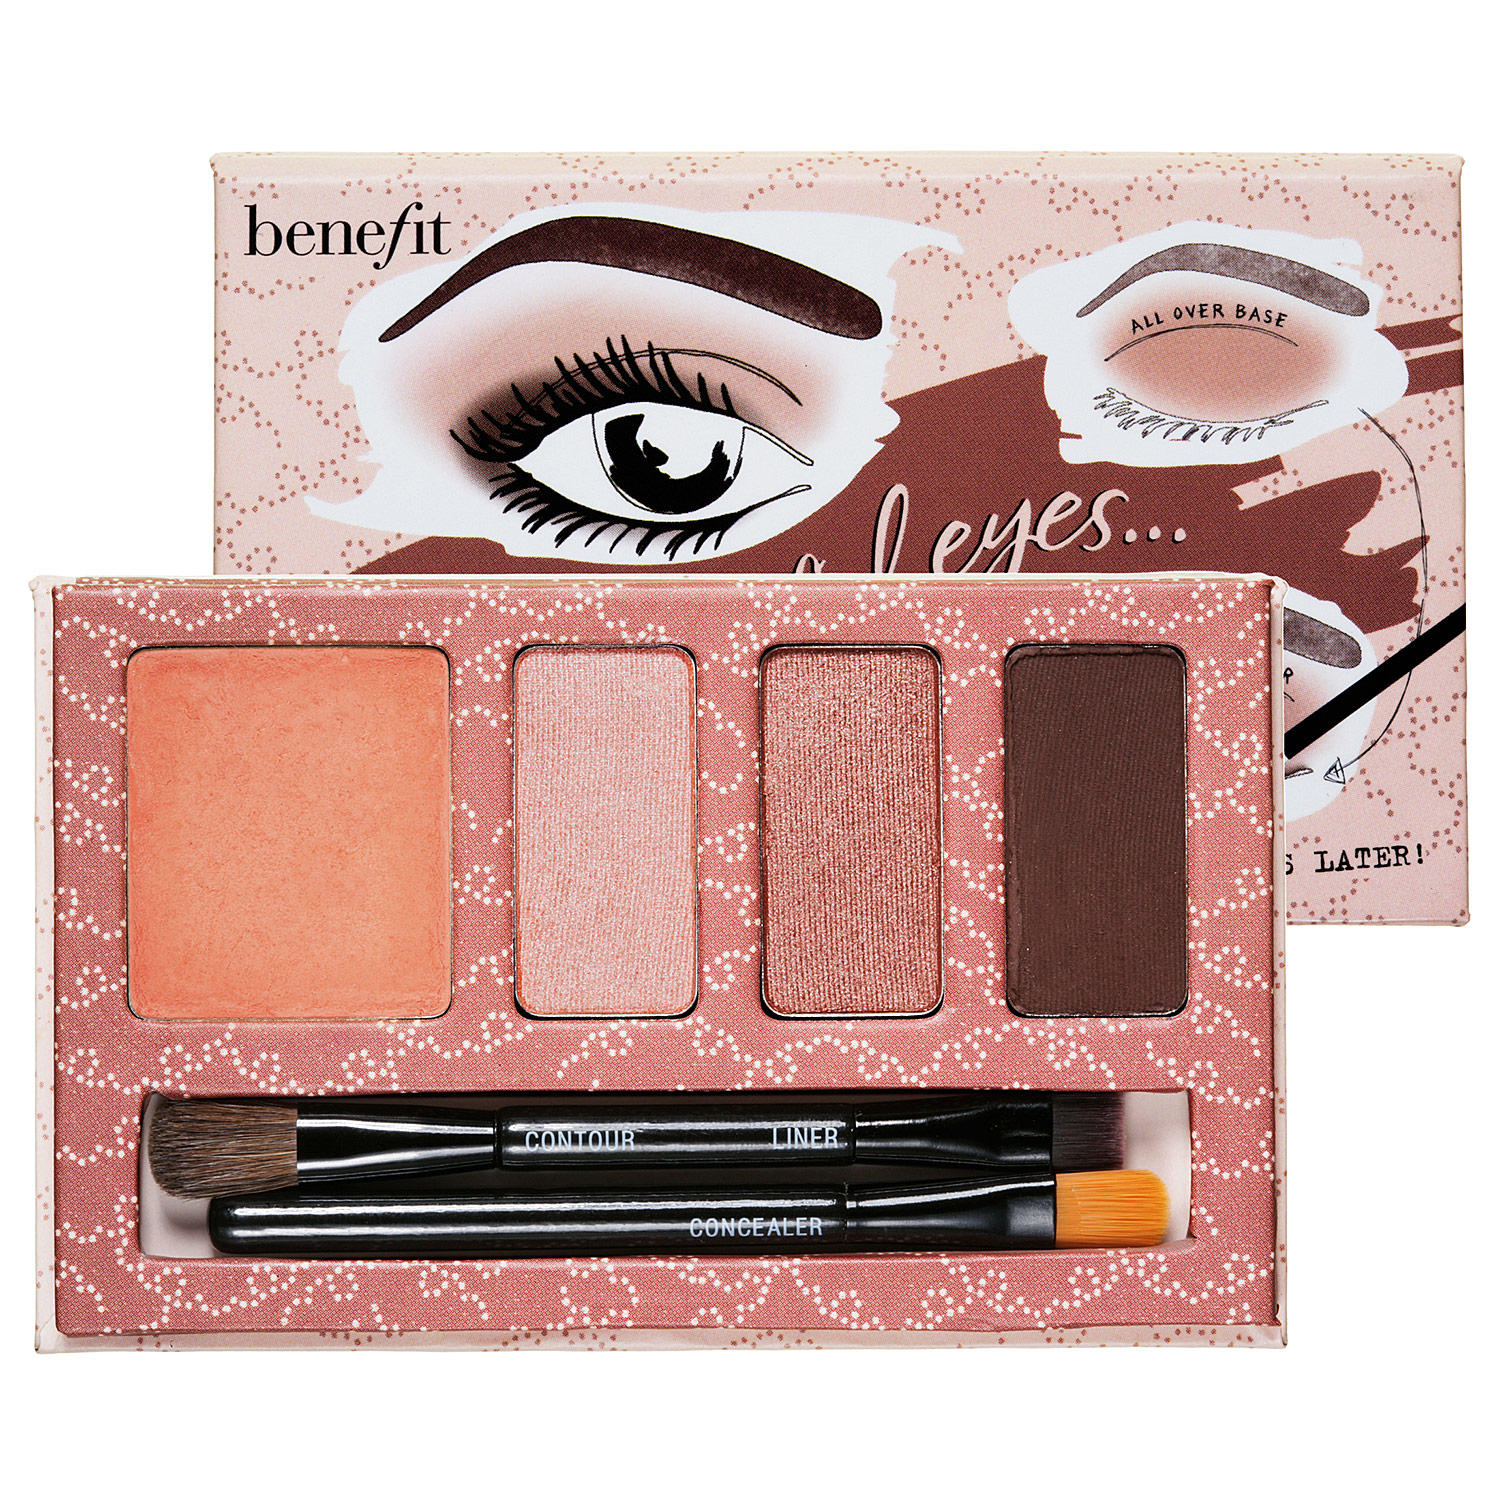 Benefit Big Beautiful Eyes Contour Kit (without accessories)